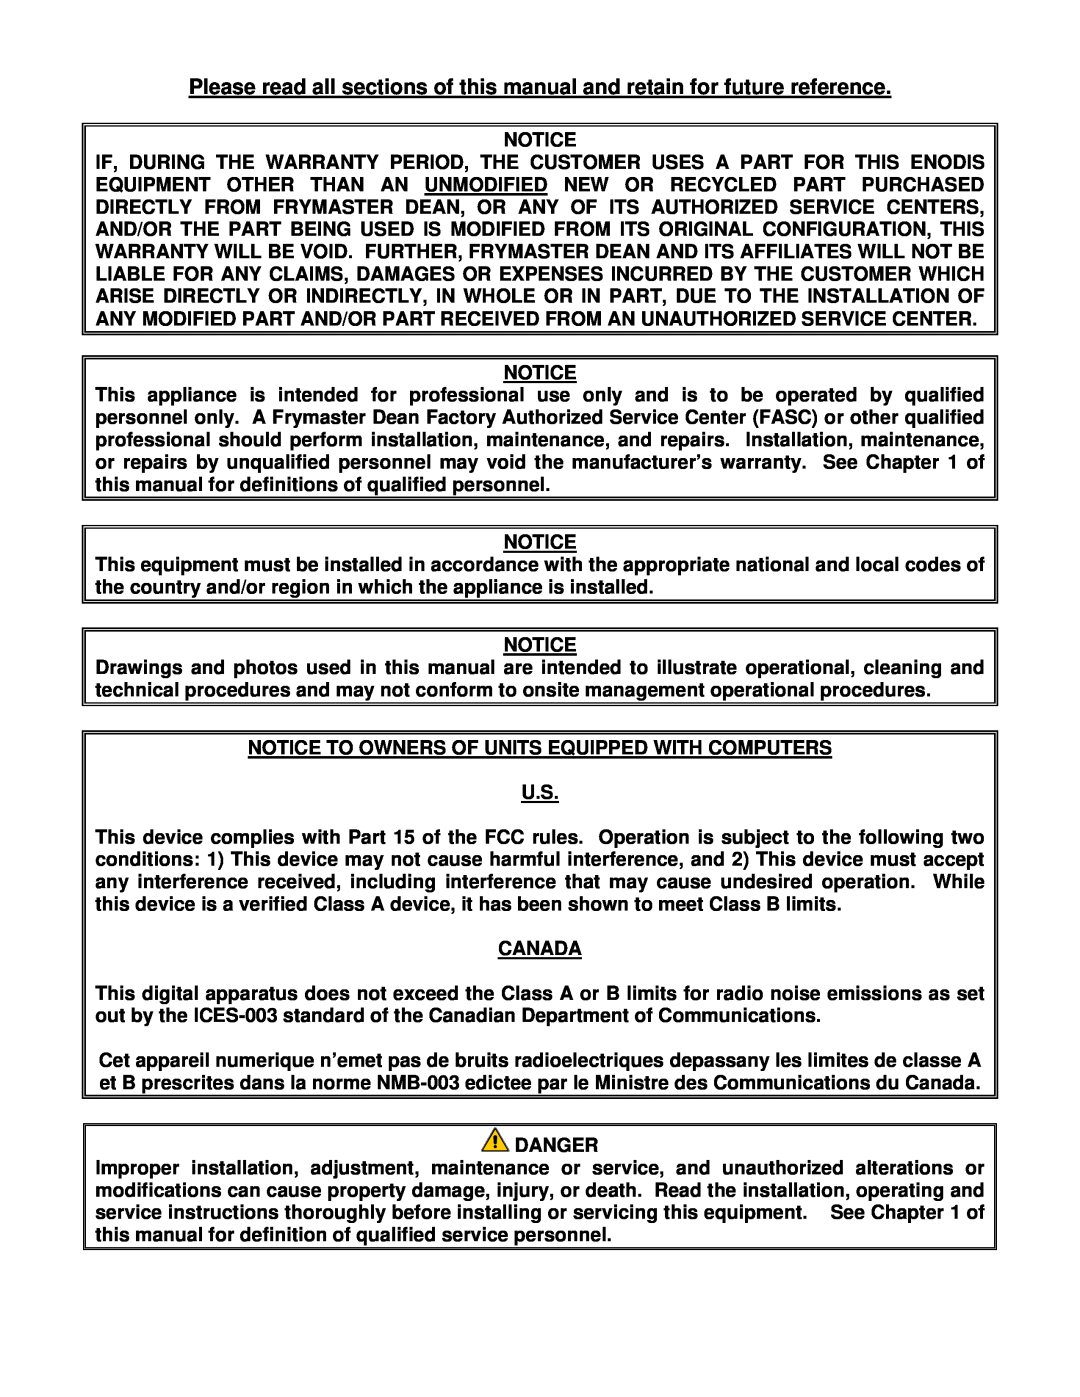 Frymaster BIH1721, FPH1721 operation manual Notice To Owners Of Units Equipped With Computers U.S 